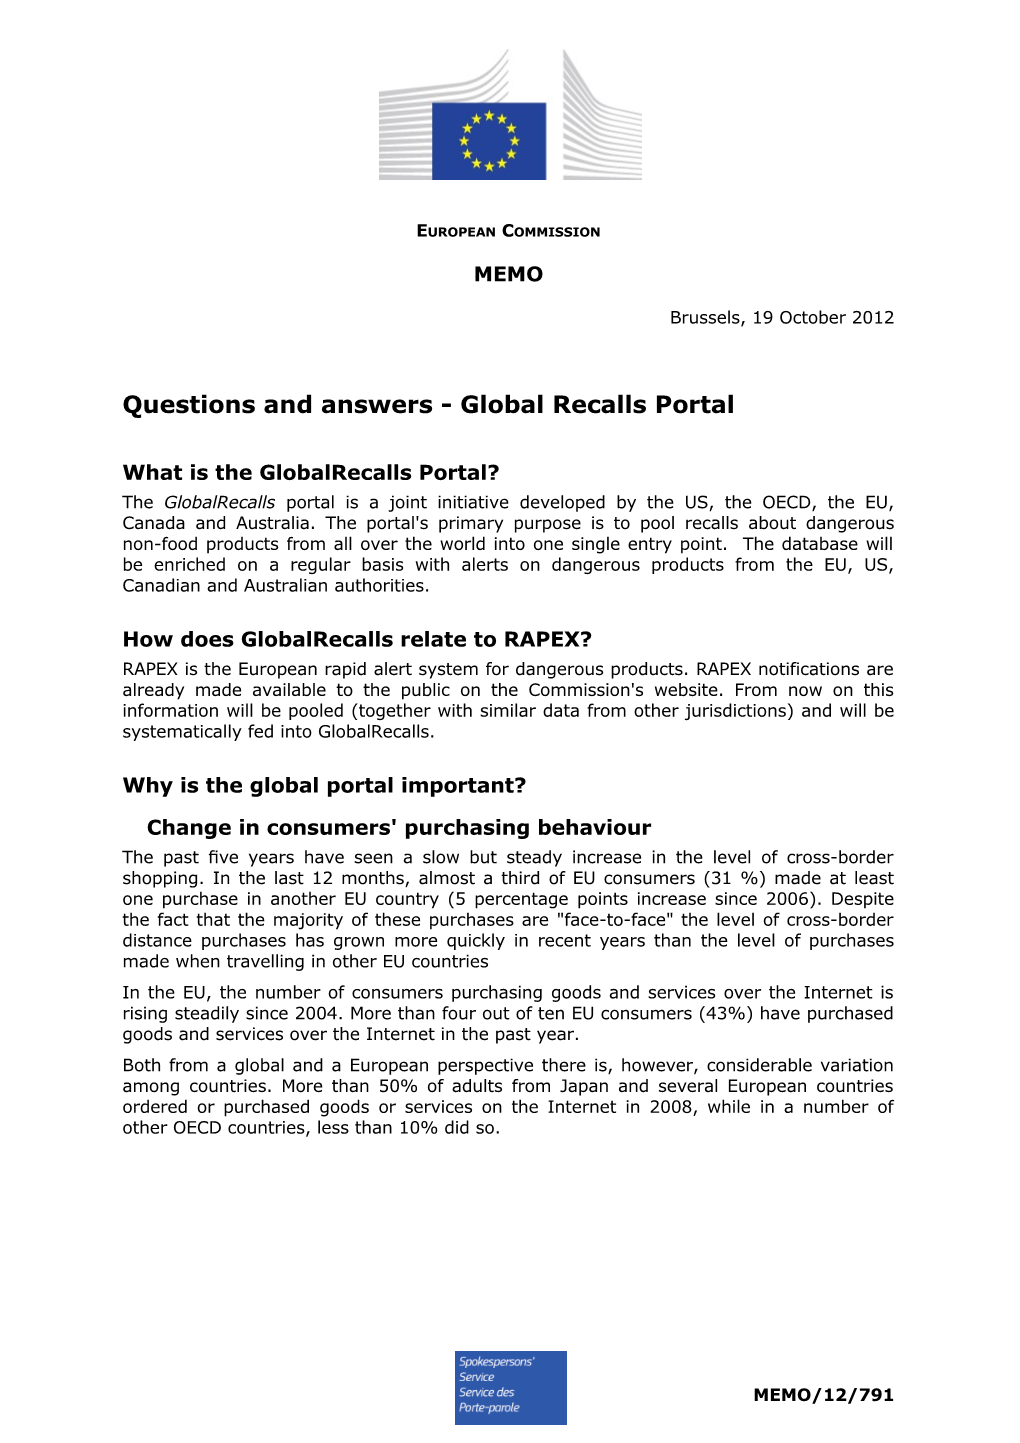 Questions and Answers - Global Recalls Portal